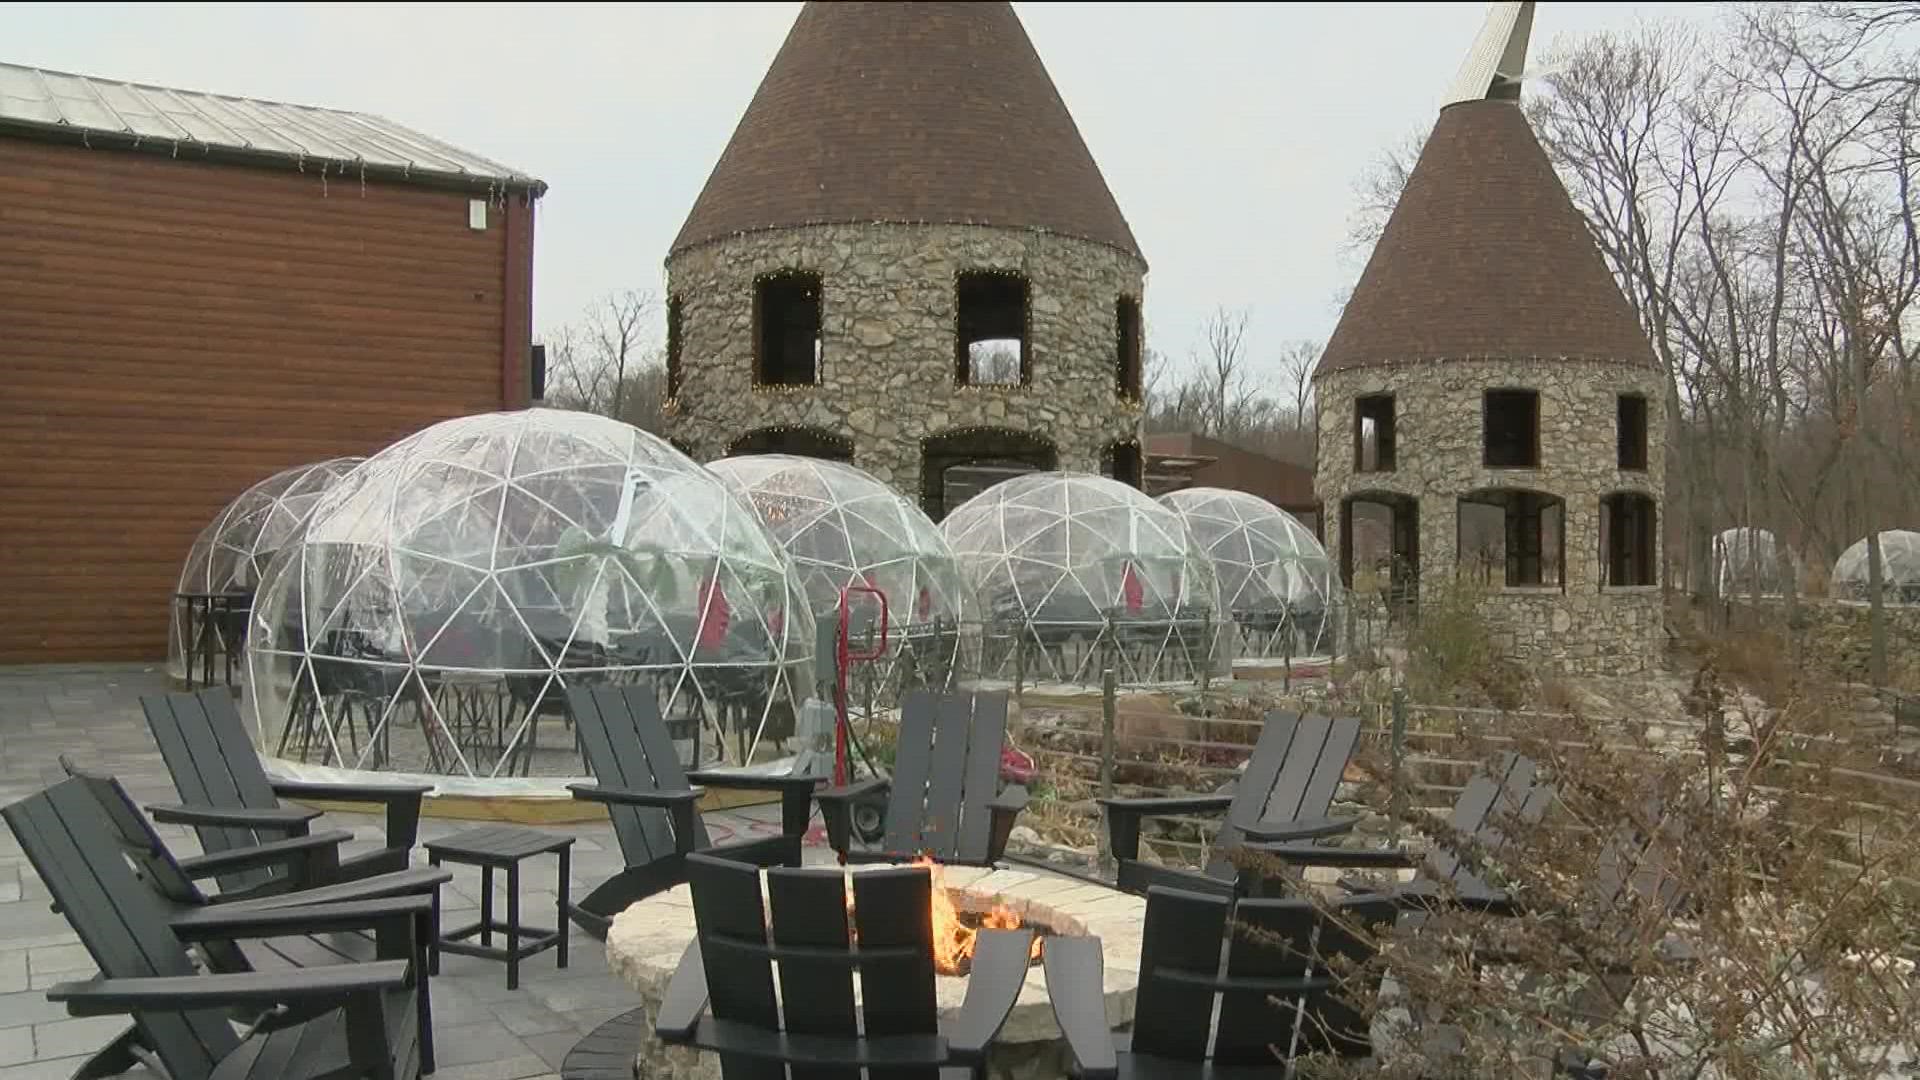 They were initially a solution to stay in business under COVID-19 protocols, but patio igloos have become a patron favorite during winter months.